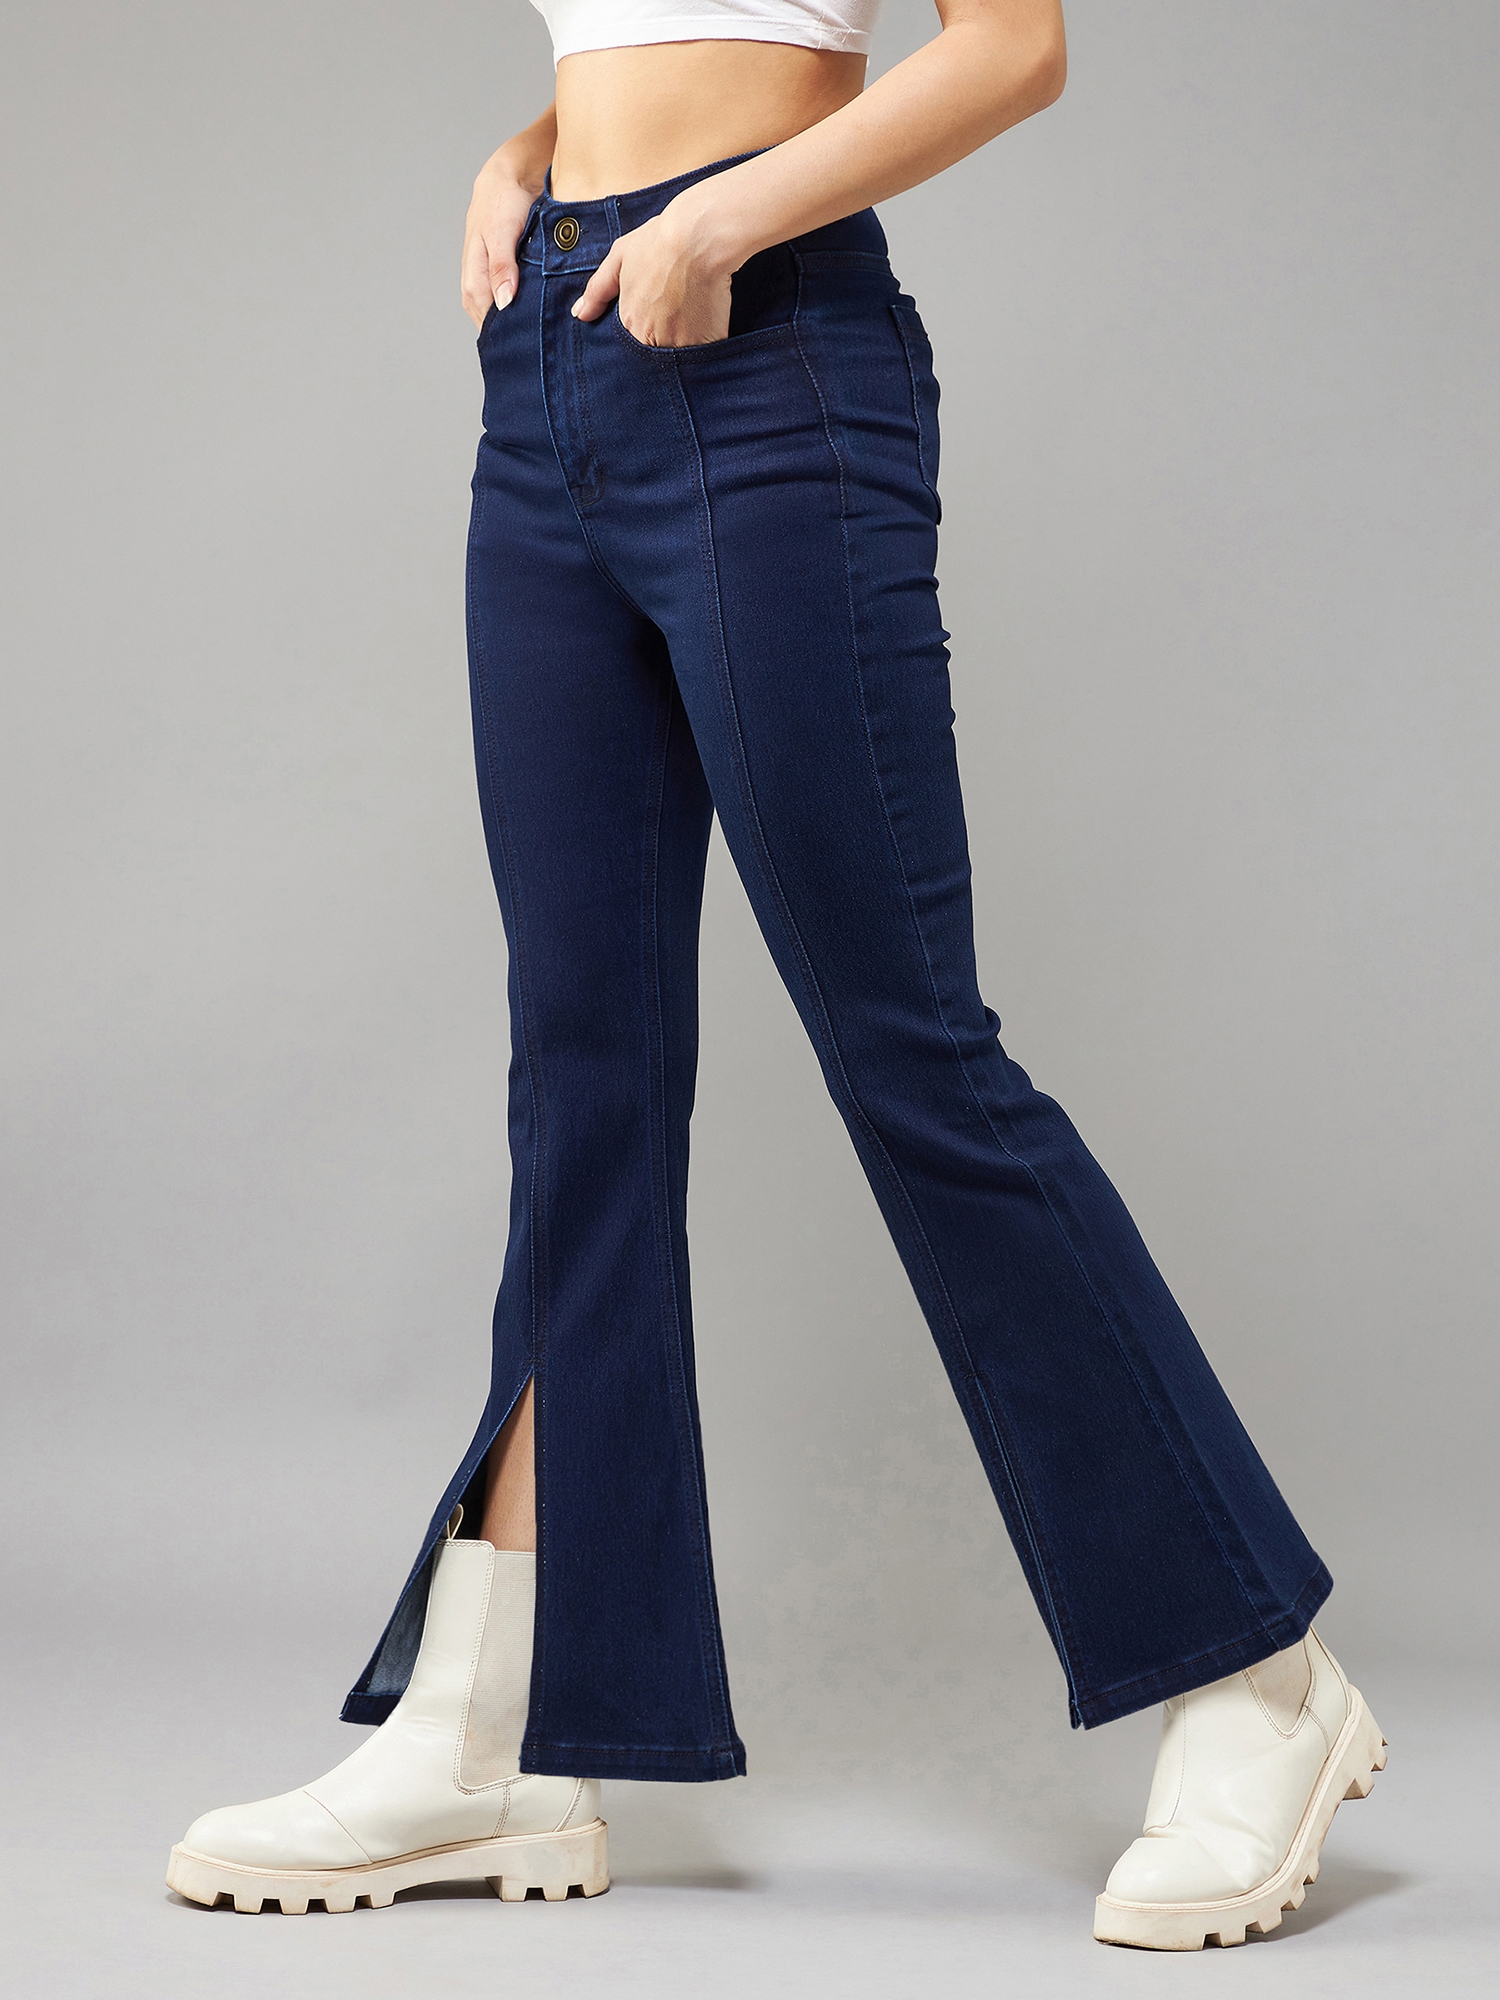 Women's Navy Blue Bootcut High rise Clean look Regular Stretchable Denim Jeans